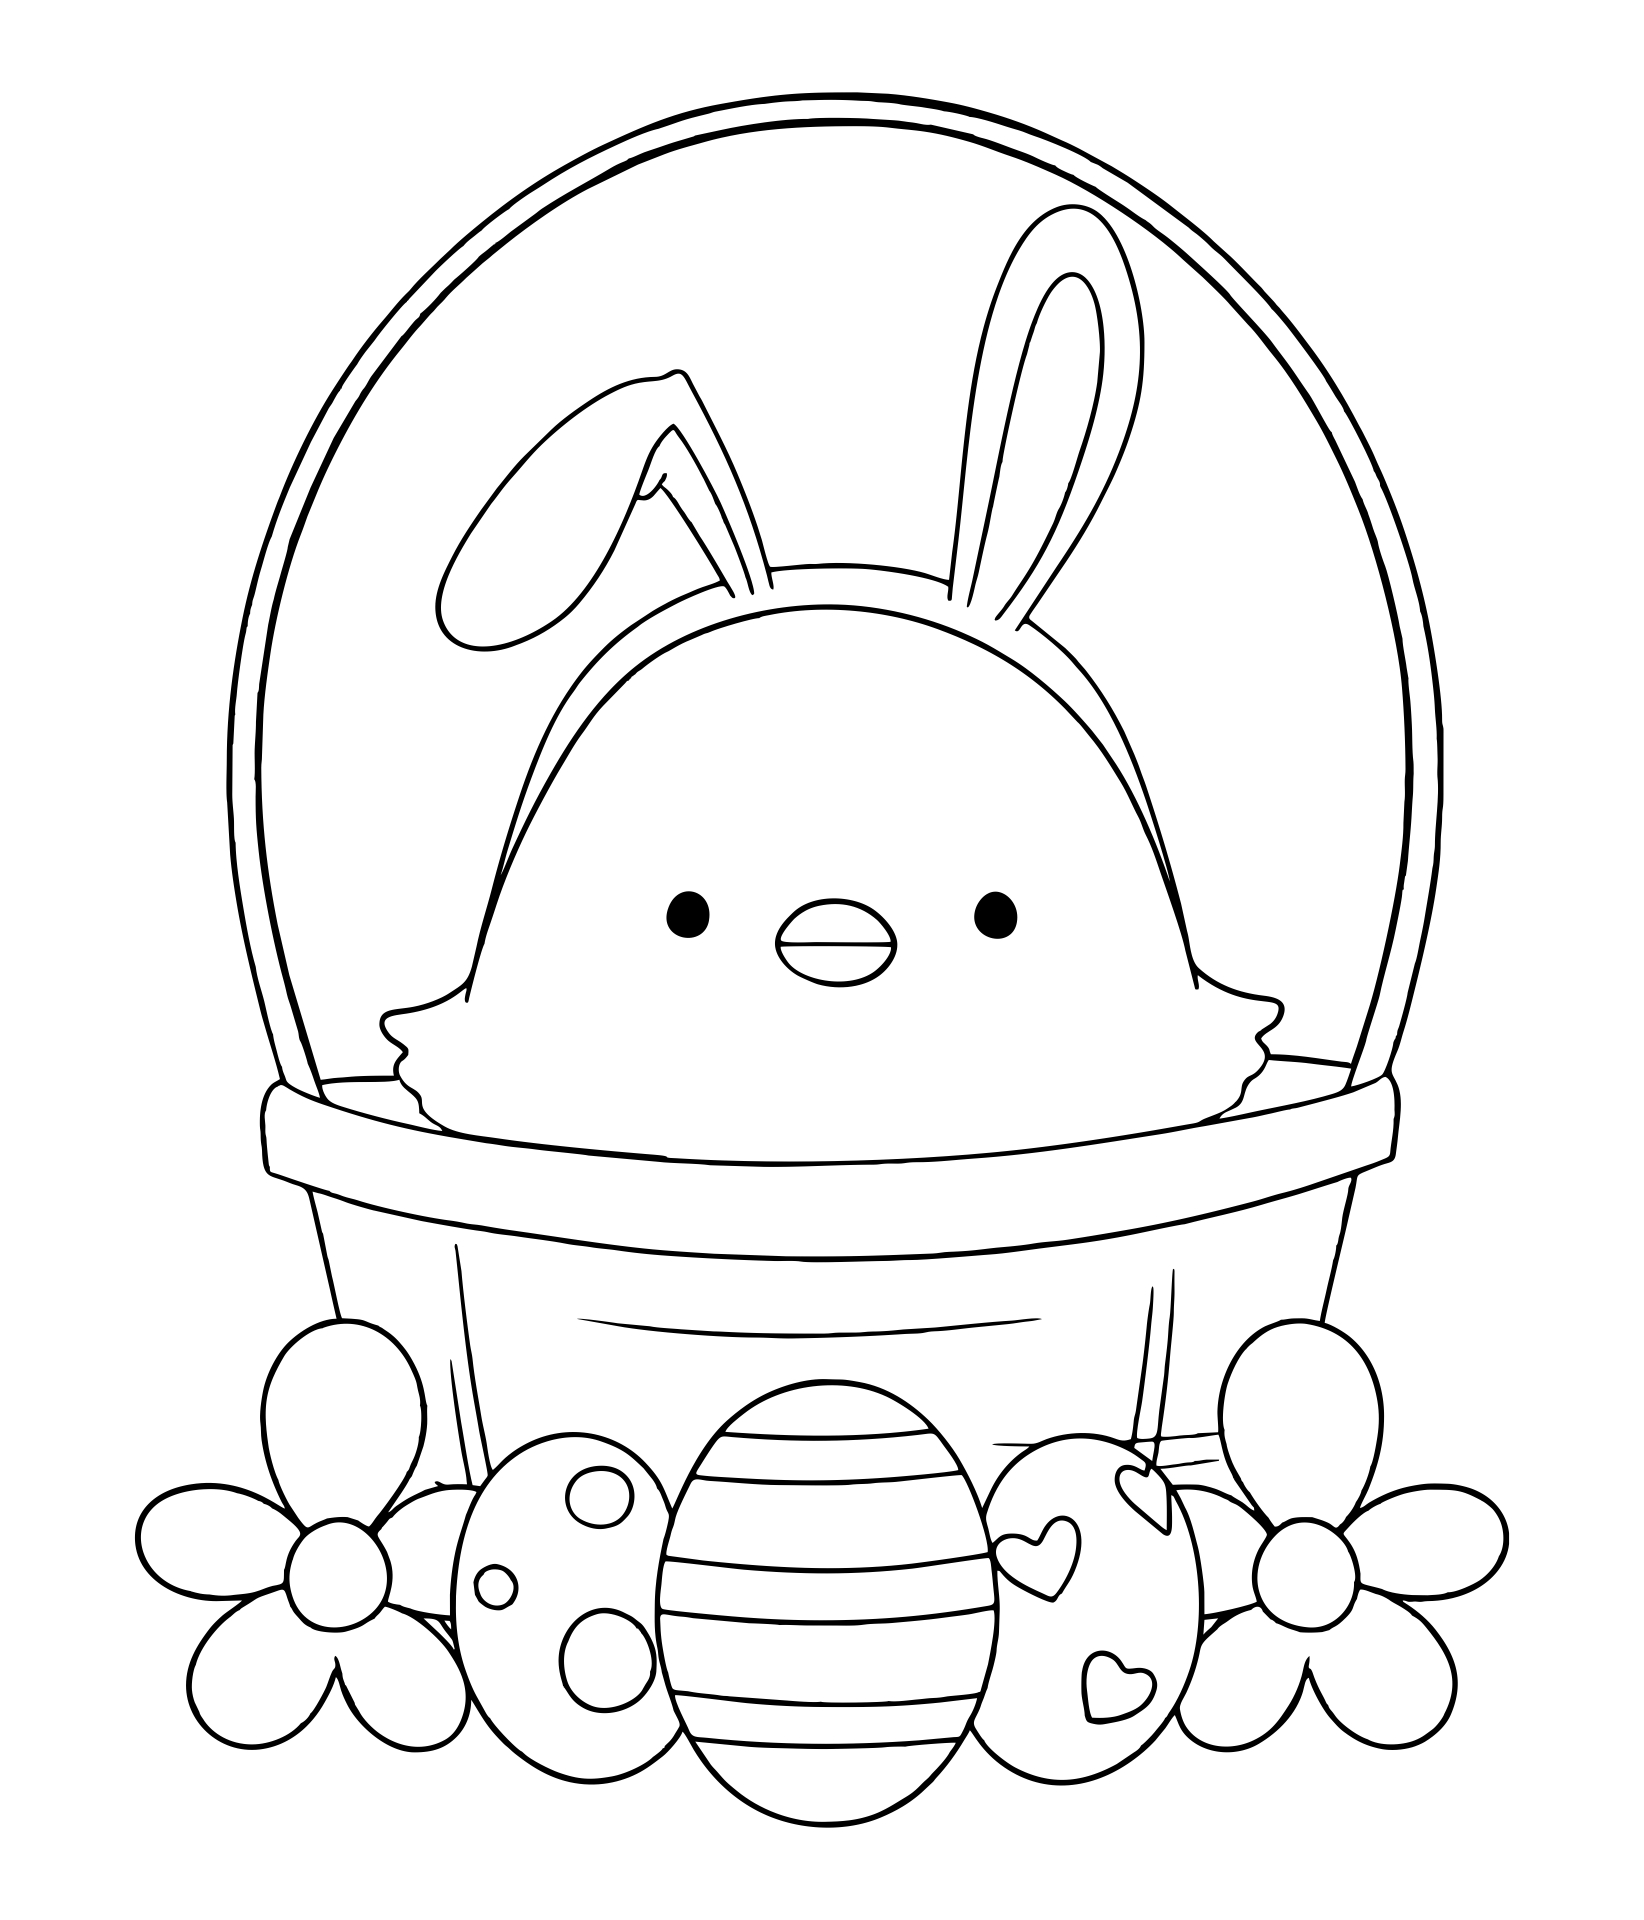 Cute Easter Chicks Coloring Pages Printable